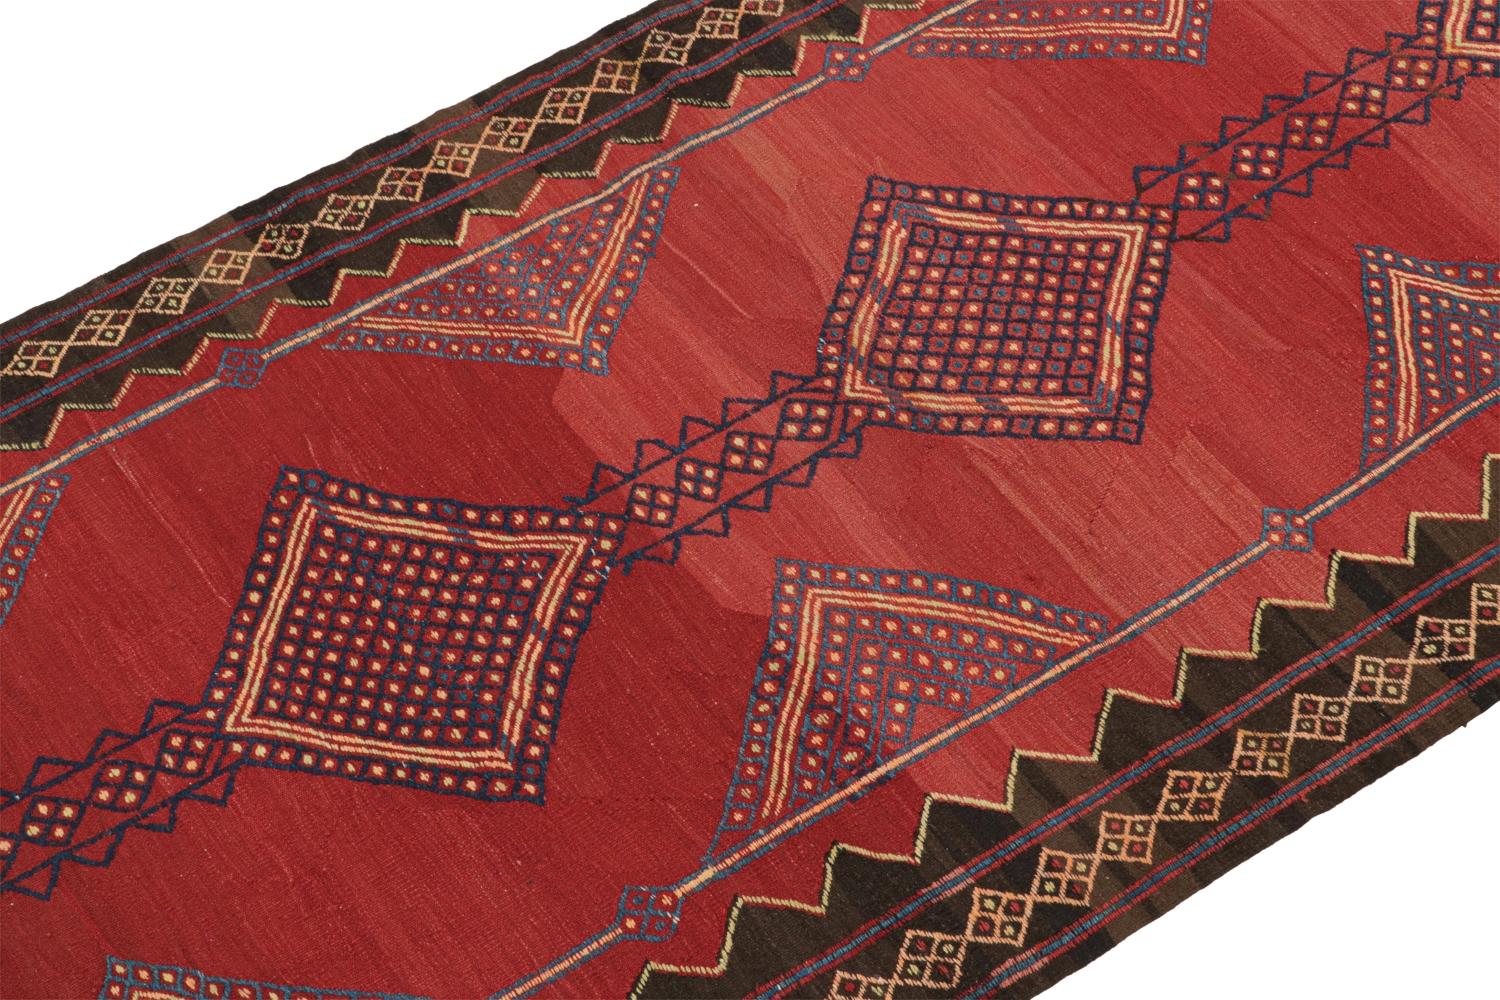 This vintage 5x14 Persian kilim is a mid-century tribal rug believed to originate from the Khalkhal village in Azerbaijan.

On the Design: 

Handwoven in wool, this flatweave enjoys a saturated red open field with blue geometric patterns and a